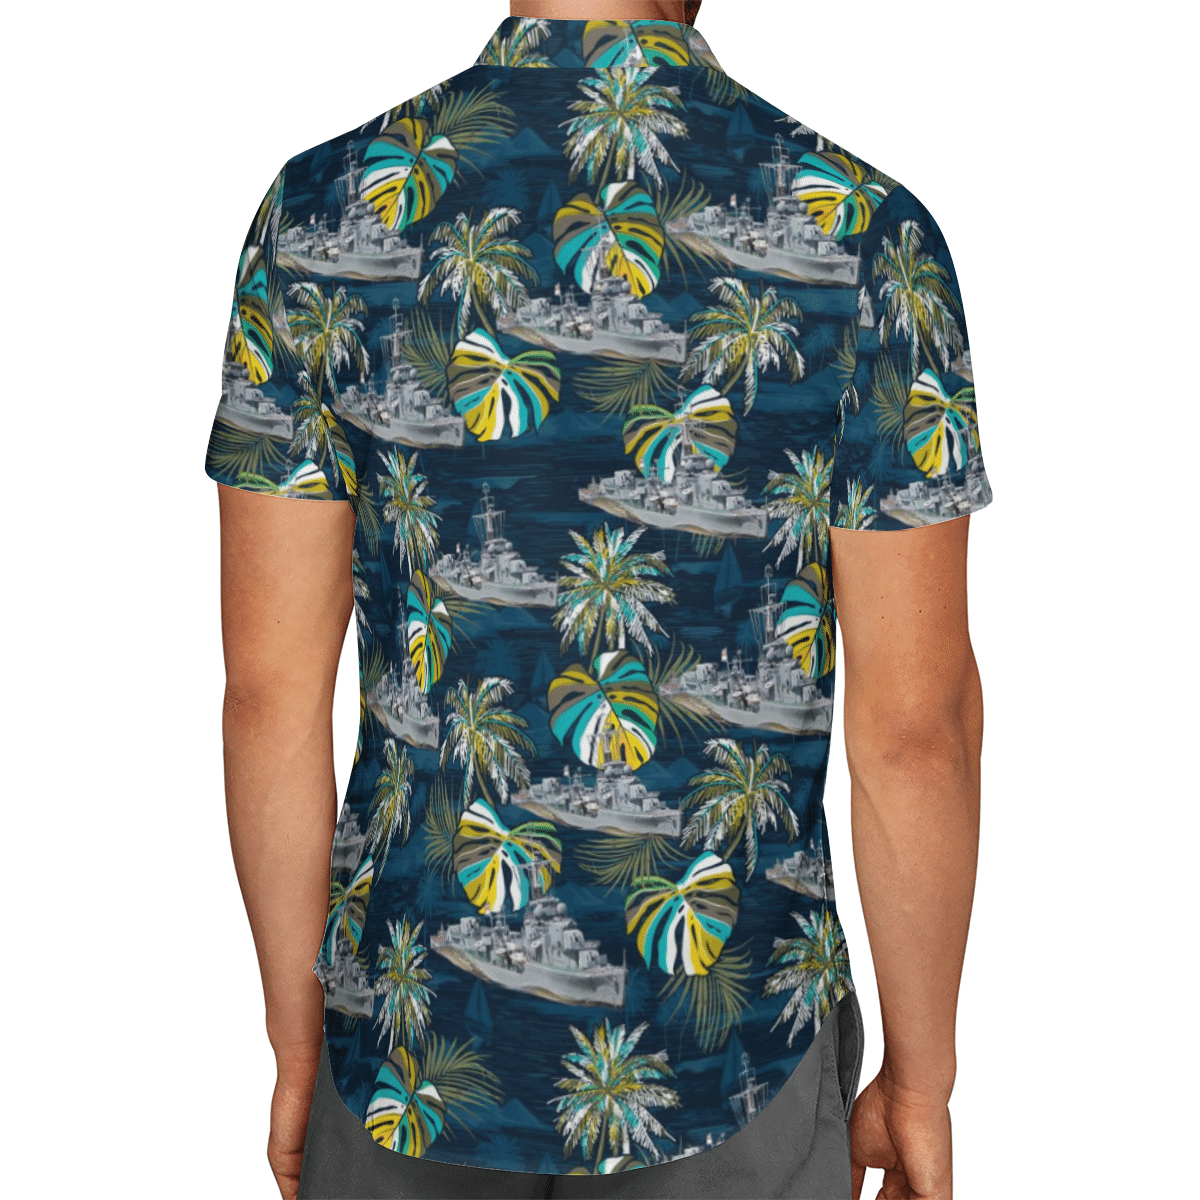 Going to the beach with a quality shirt 234